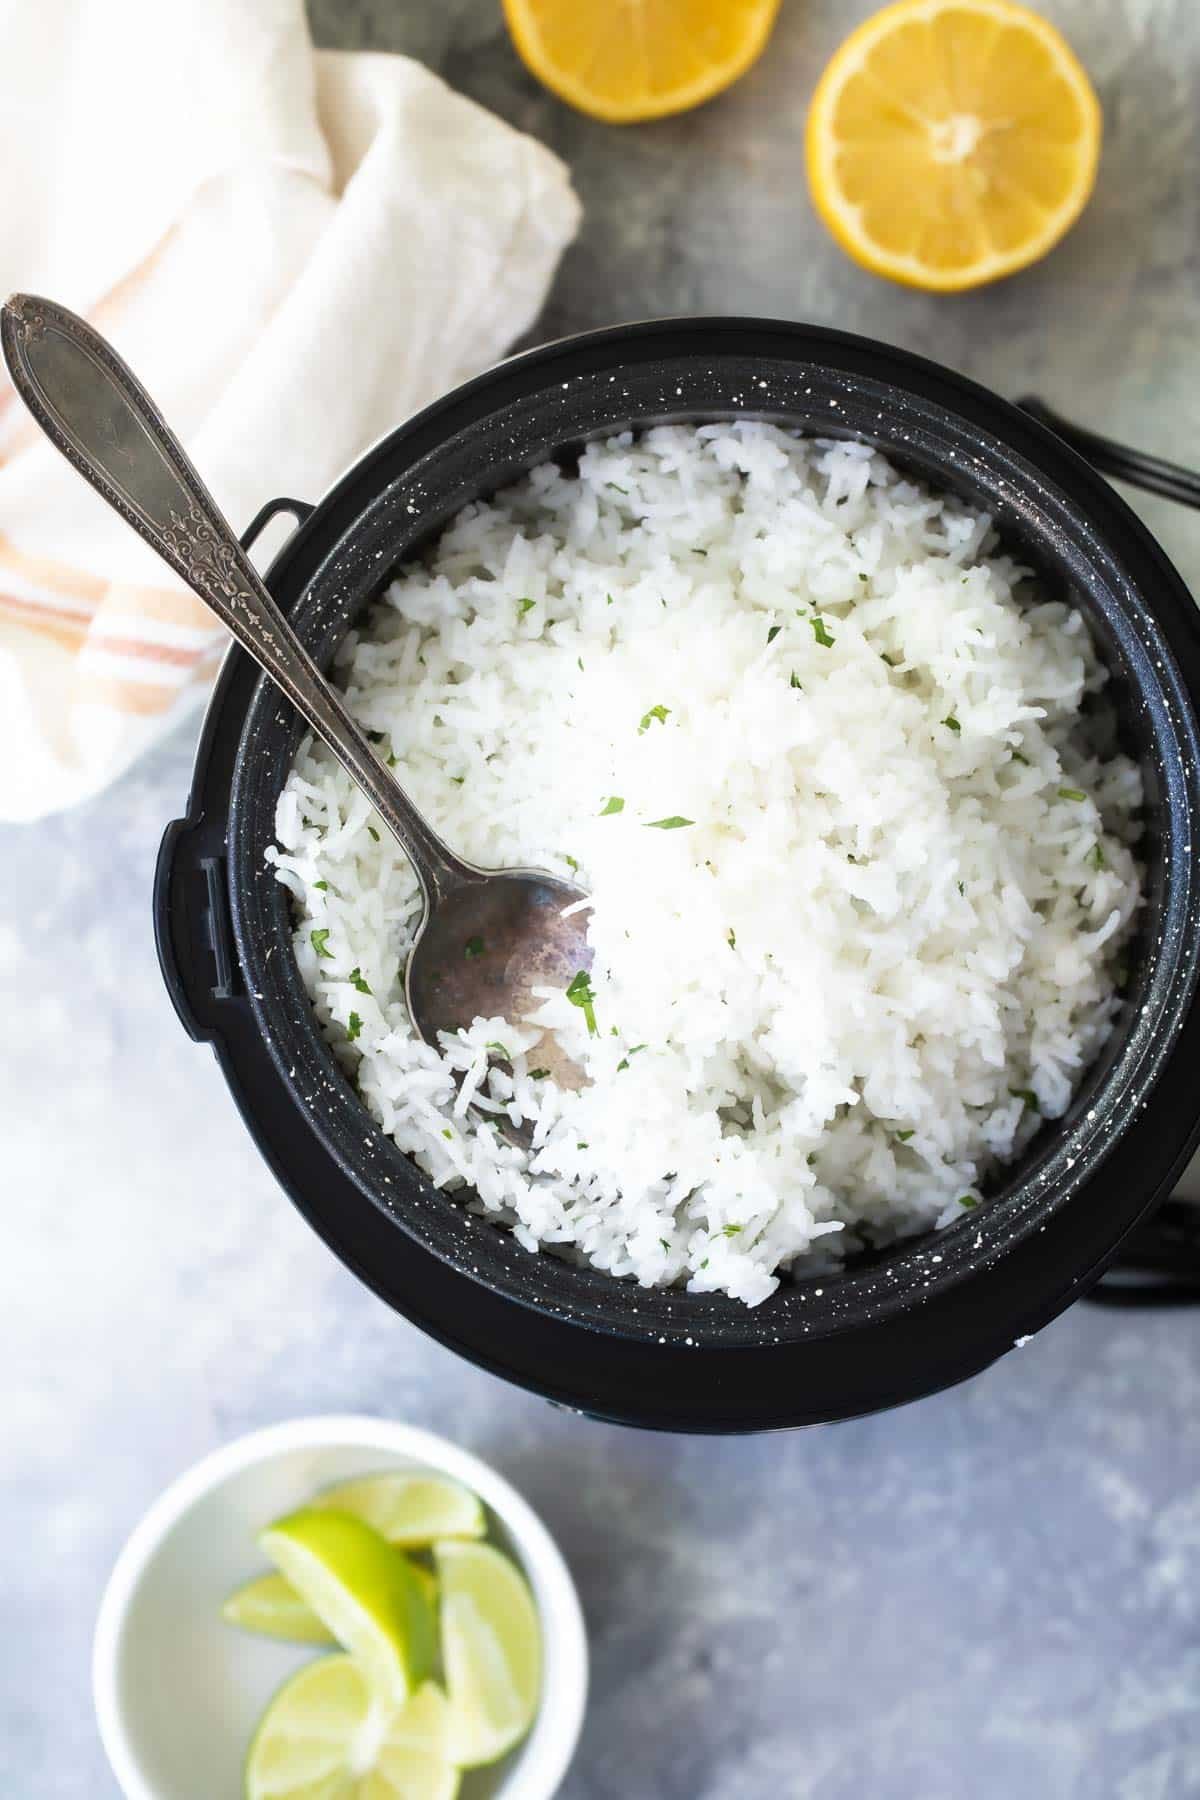 https://www.culinaryhill.com/wp-content/uploads/2022/10/Chipotle-Cilantro-Lime-Rice-Culinary-Hill-LR-08-1.jpg